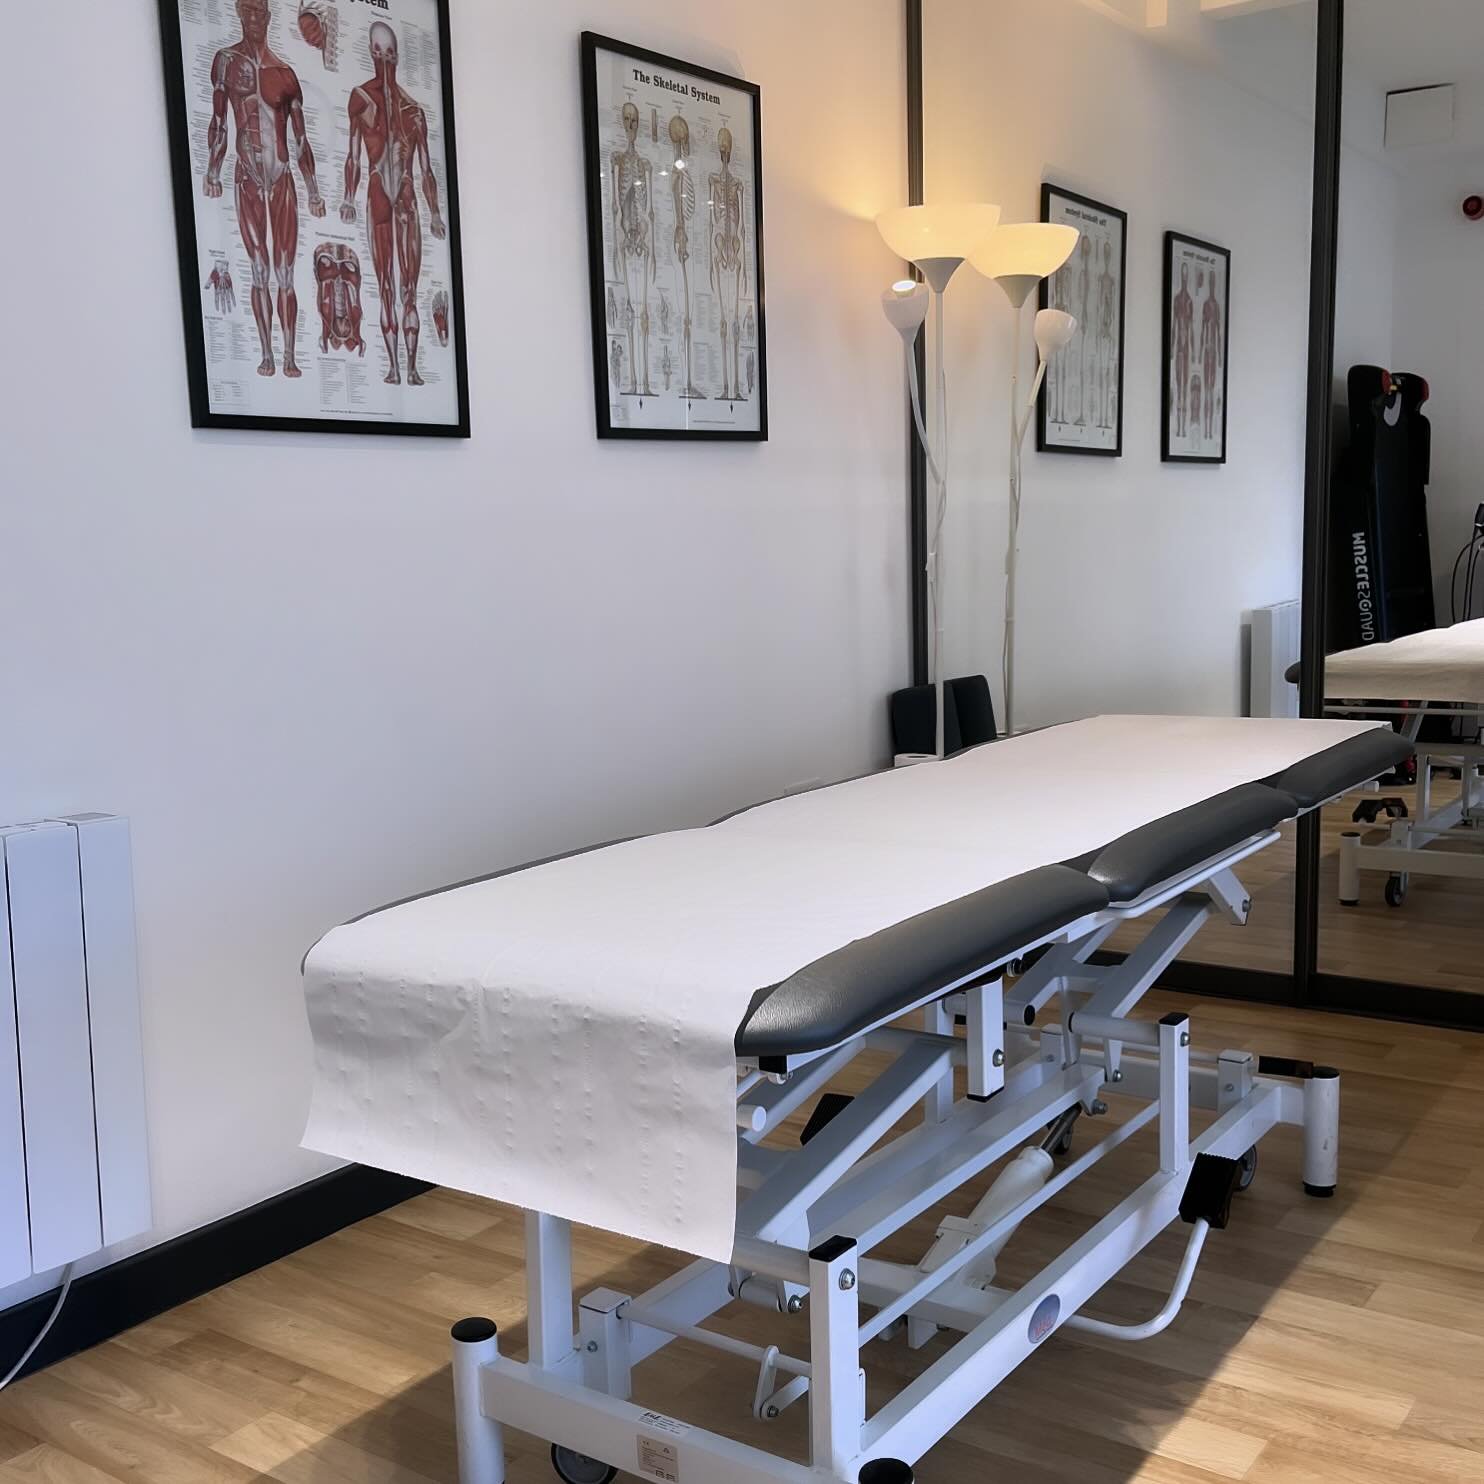 Good morning from the Treatment room.
It&rsquo;s going to be a lovely day today on Rhos. 
.
.
@physioandsportsinjuryclinic [Link in Bio to book in]
.
#physio #physionorthwales #physioandsportsinjuryclinic #rhosphysio #rhossportsmassage #rhosonsea #co